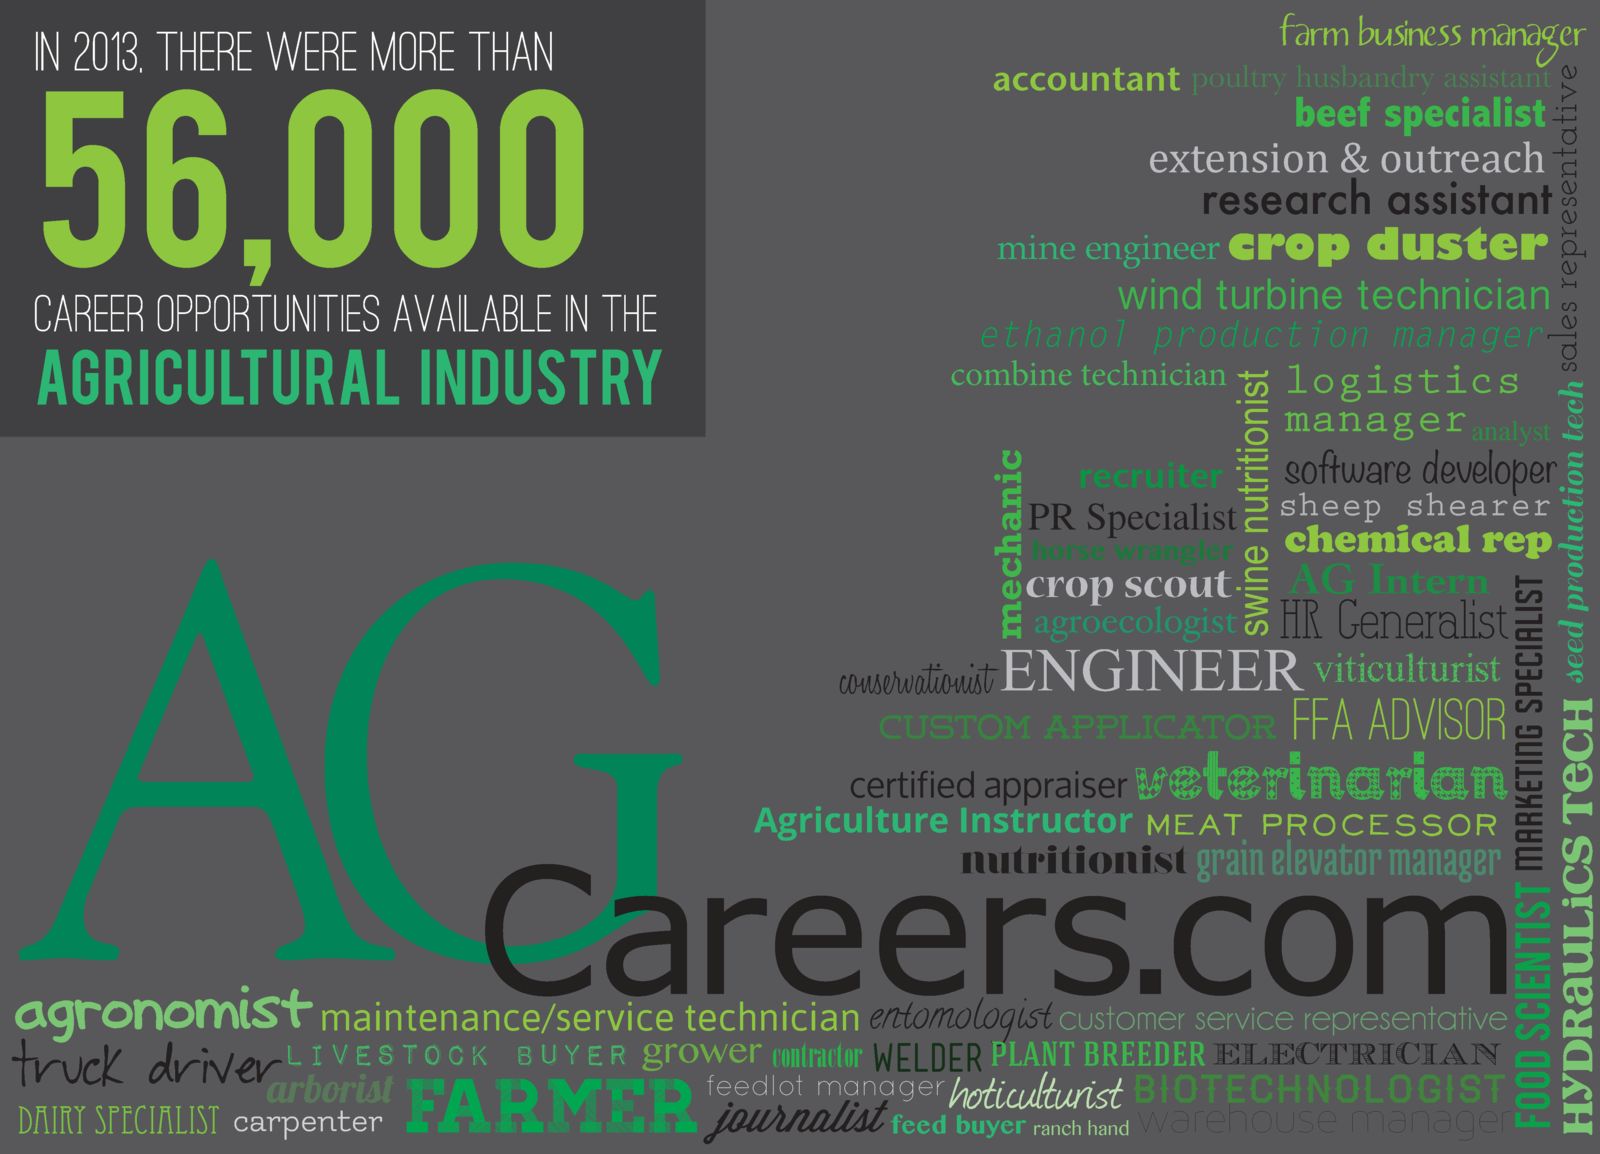 Defining Agriculture Careers